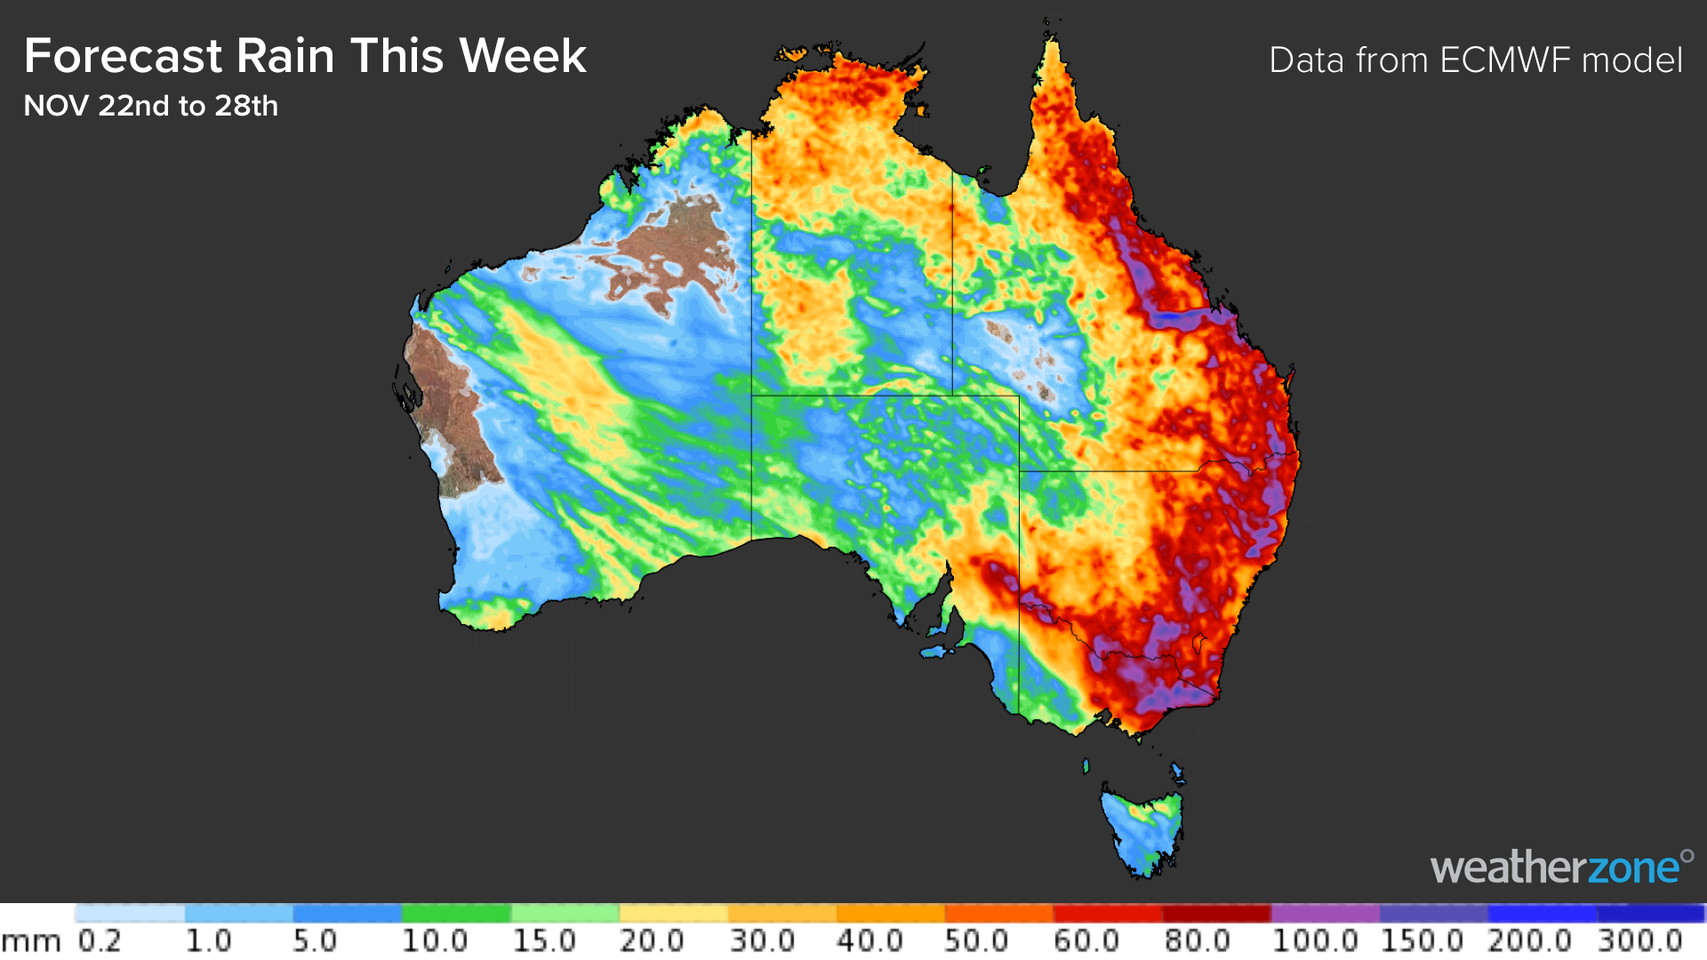 Weatherzone says more heavy rain is likely for areas in central and eastern Australia this week, with flooding and severe thunderstorms expected. 